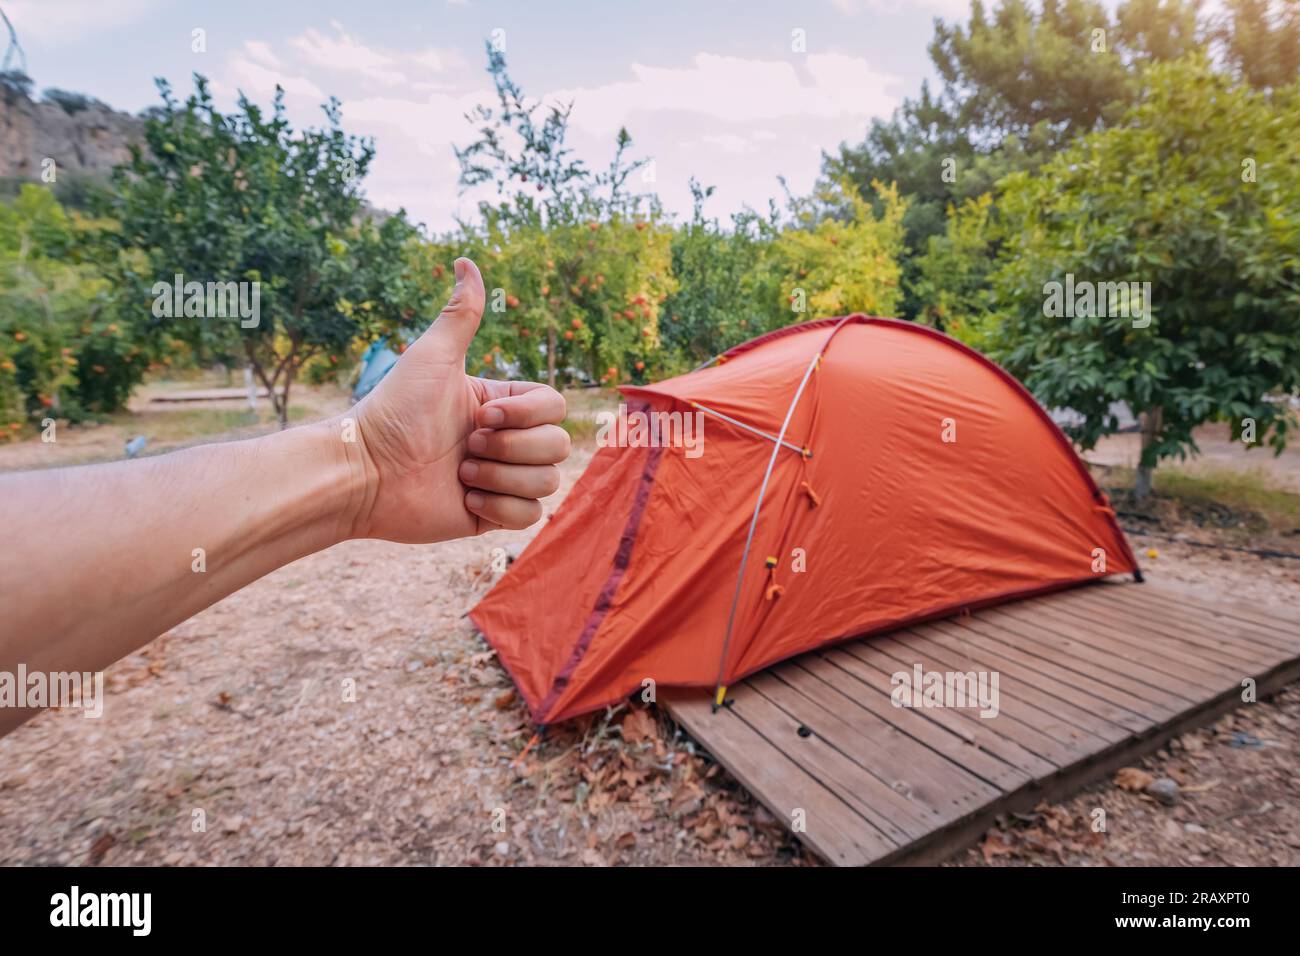 Assembling and installing a tent in a camping. Equipment and materials for hiking Stock Photo